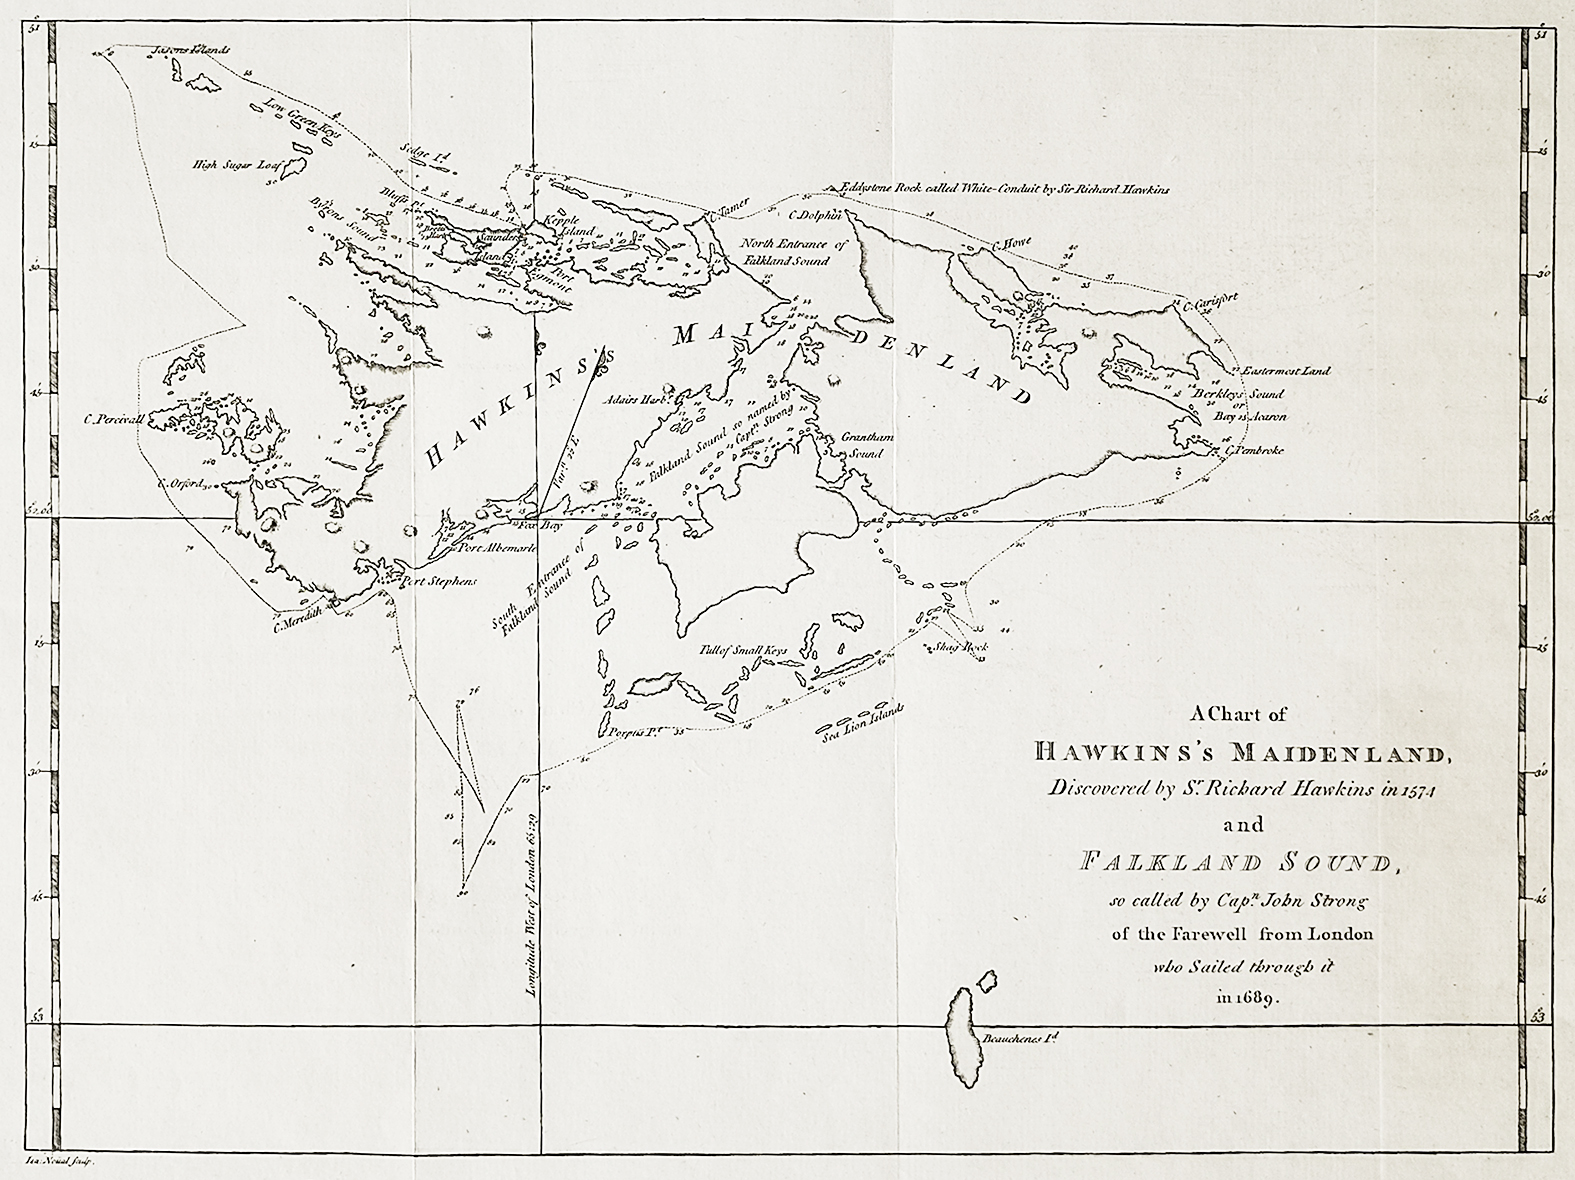 A Chart of Hawkins's Maidenland, Discovered by Sr. Richard Hawkins in 1574 and Falklands Sound, so called by Capn. John Strong of the Farewell from London who Sailed through it in 1689. - Antique Map from 1773